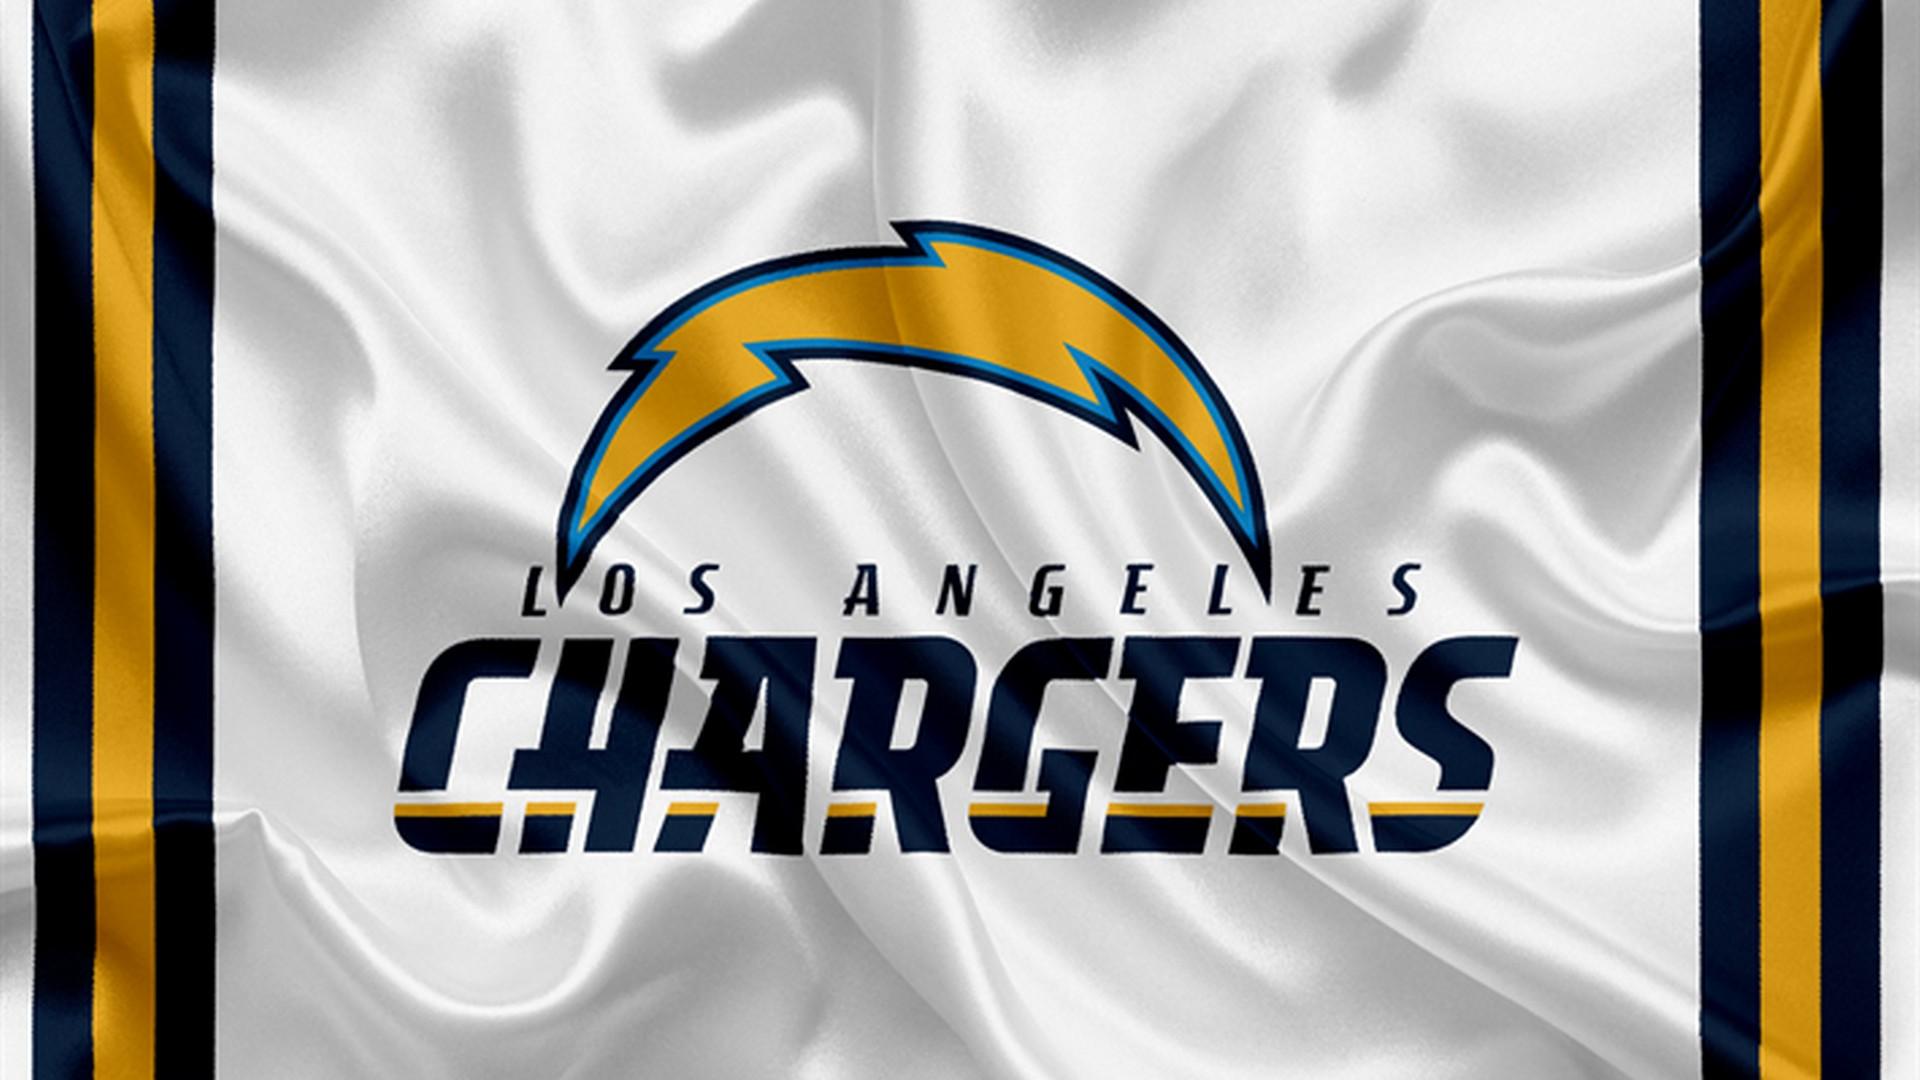 Los Angeles Chargers 2018 Wallpaper